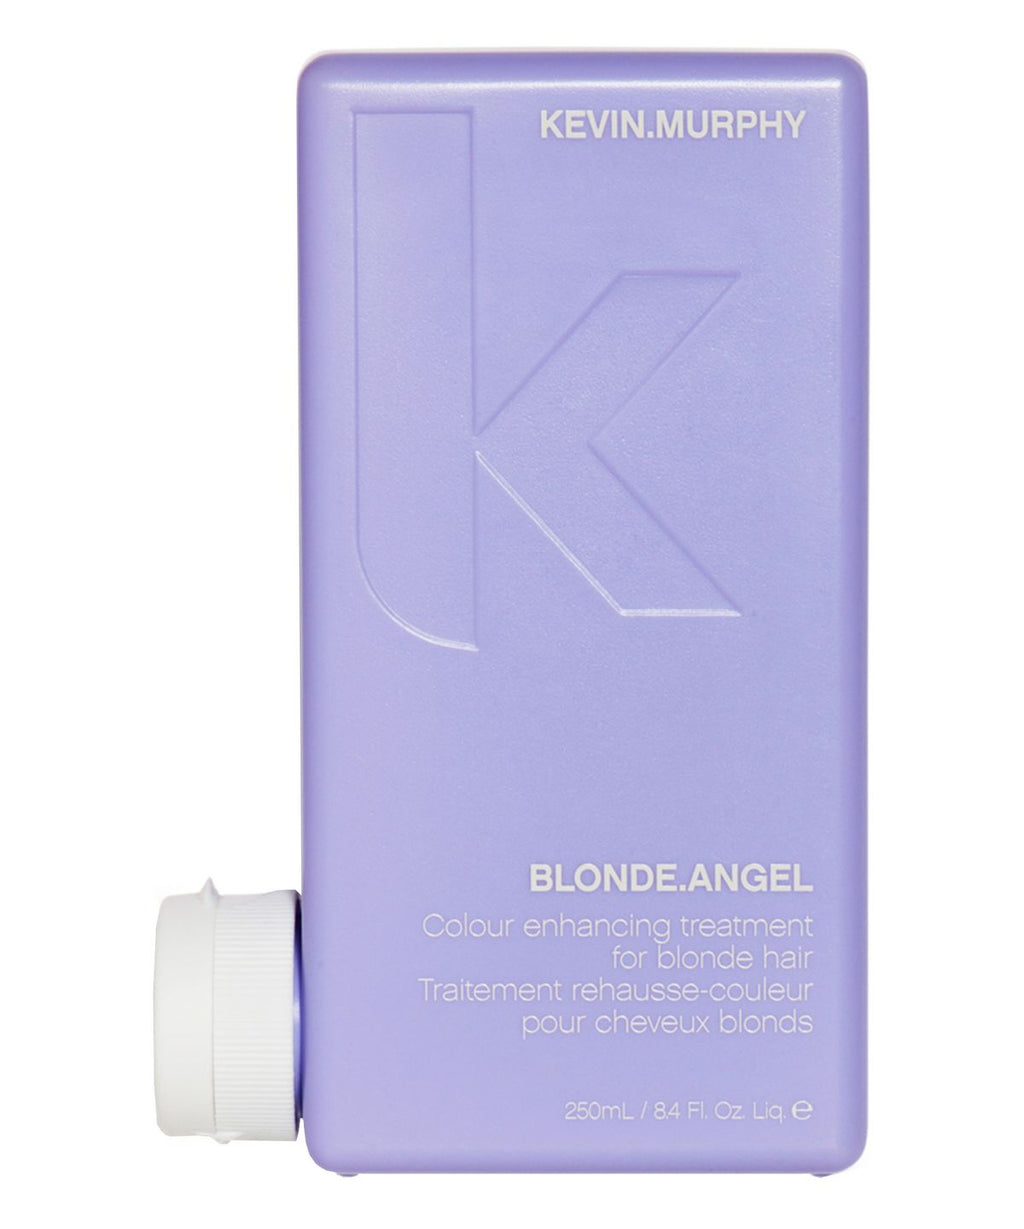 Kevin Murphy Blonde Angel Colour enhancing treatment conditioner for blonde hair 250ml 